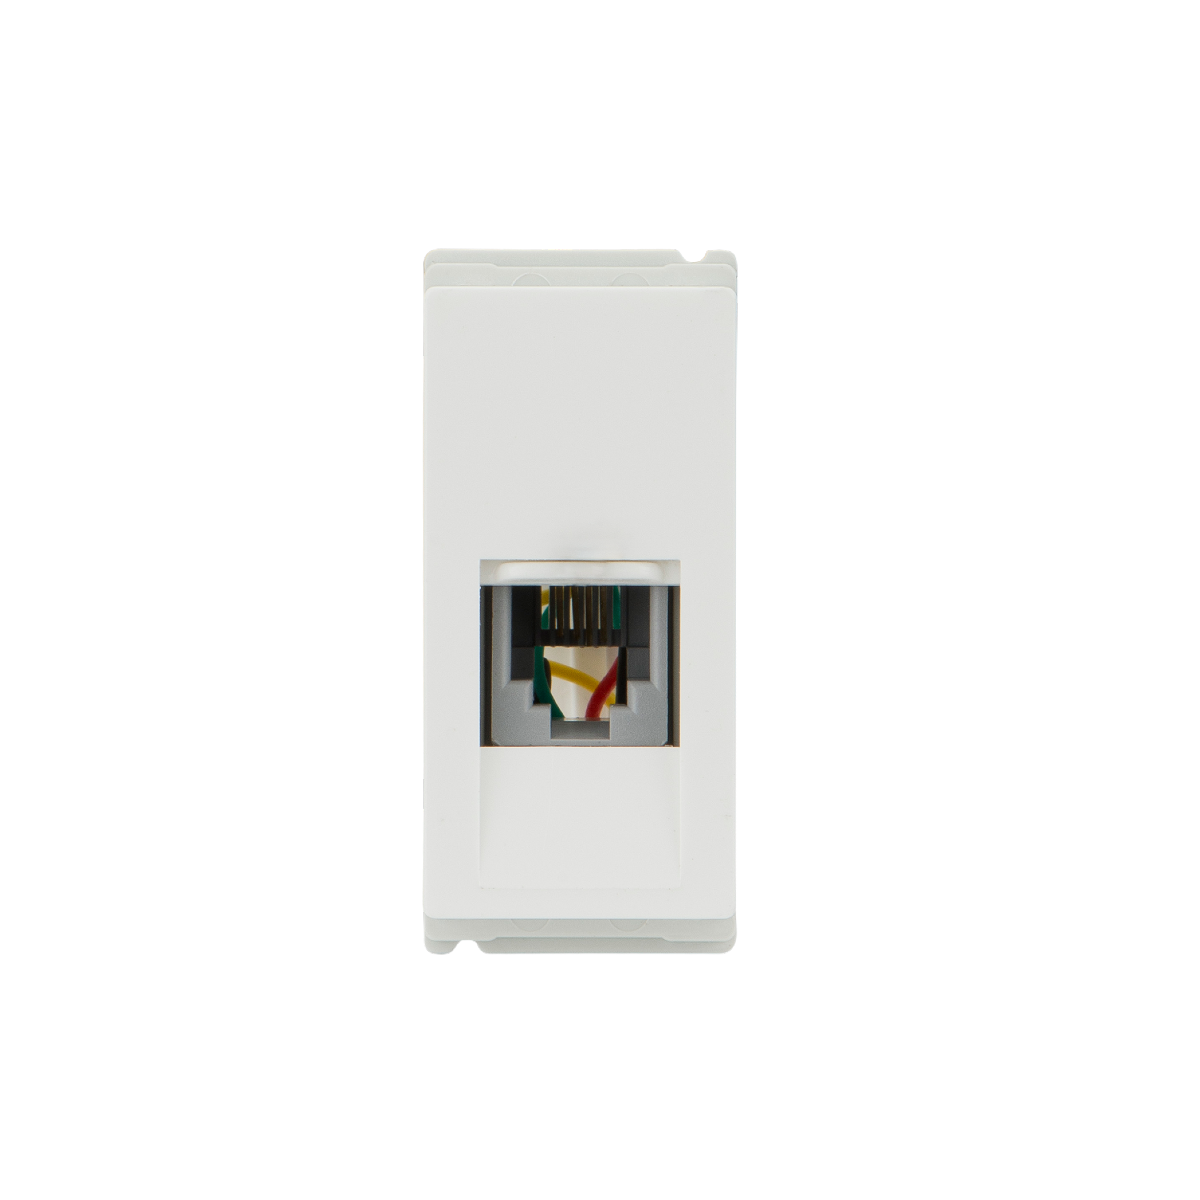 Philips Connector RJ11 with Shutter Smart-White